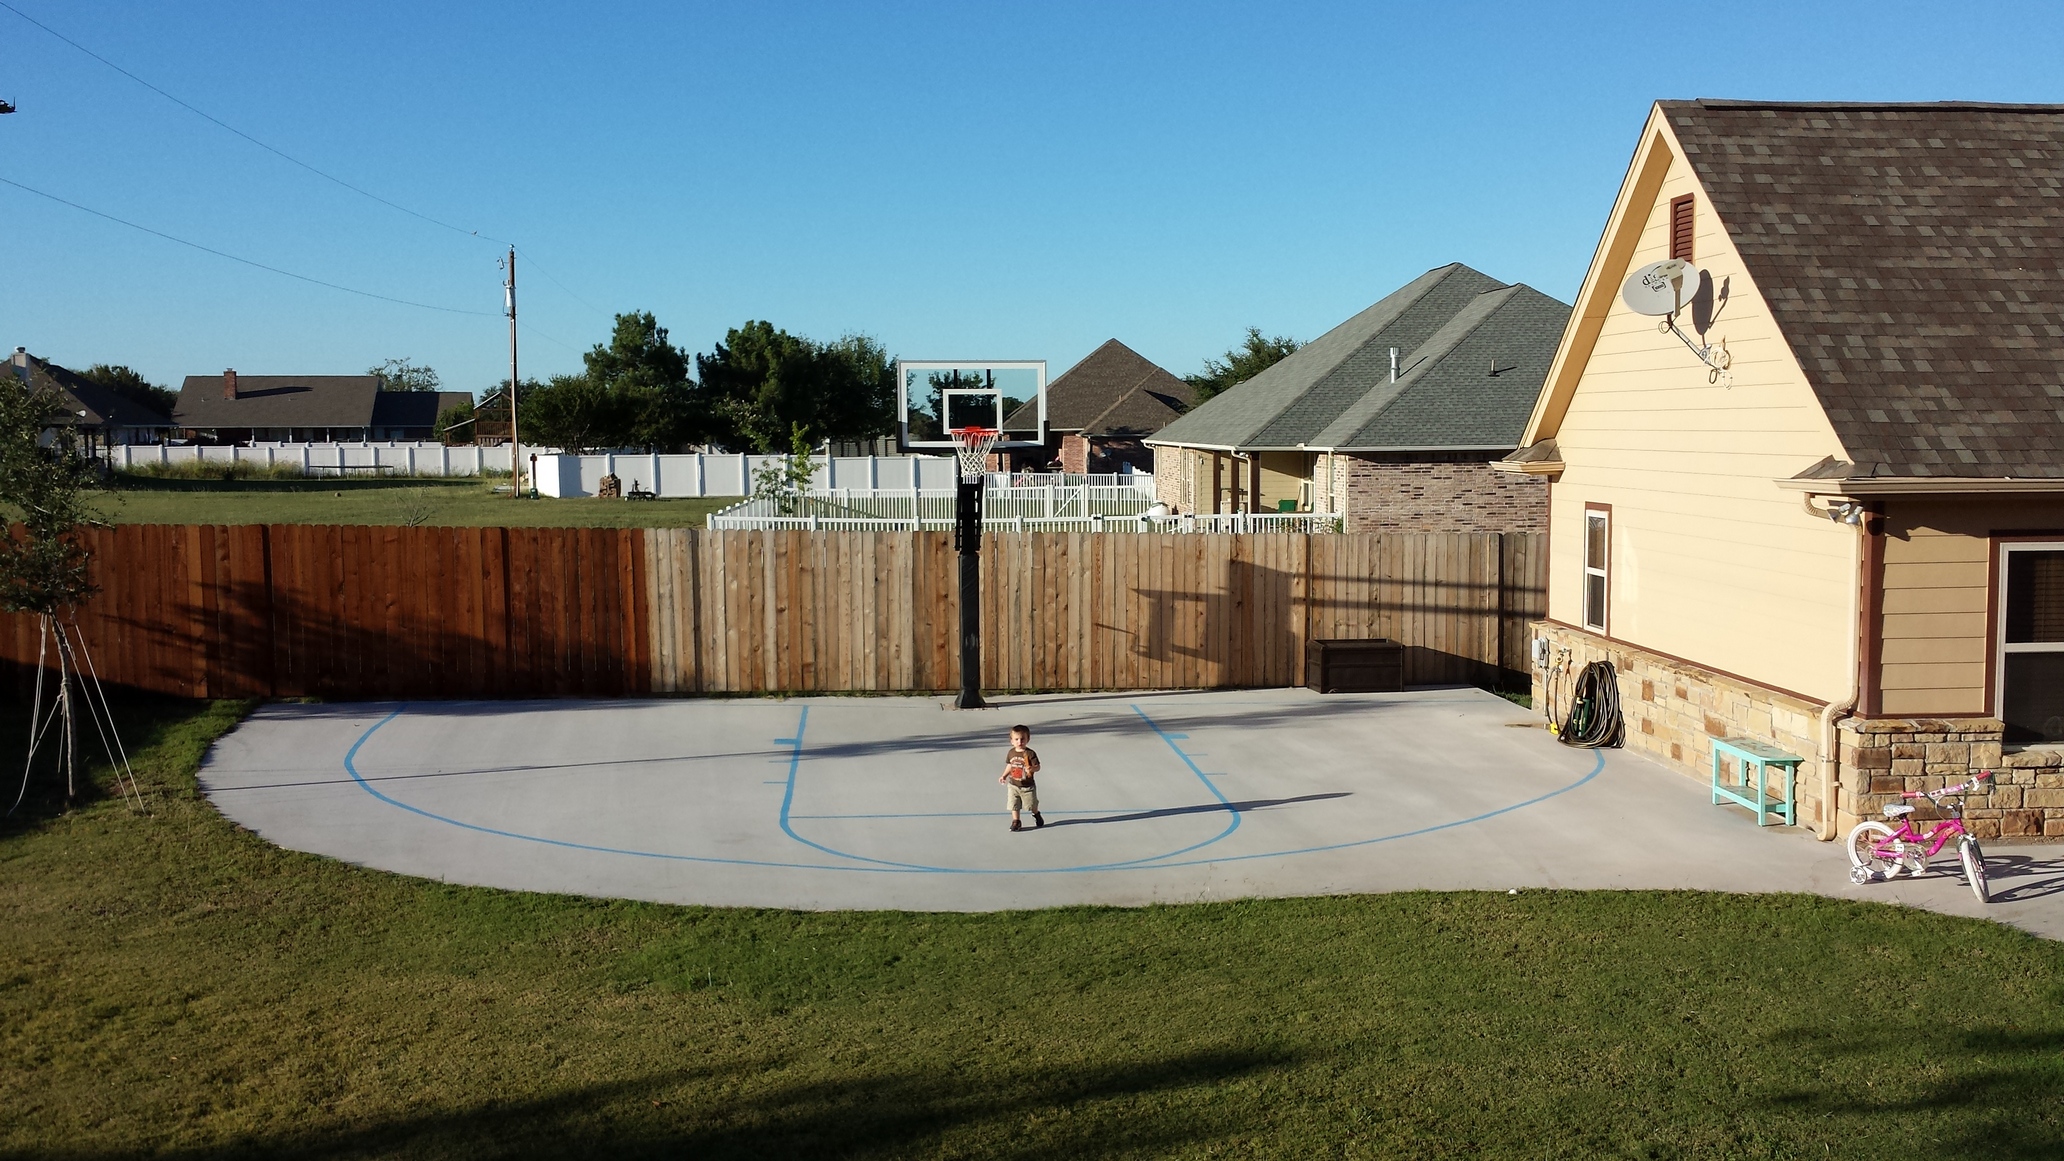 This wide shot shows the full custom court poured for this Pro Dunk Gold Basketball system.